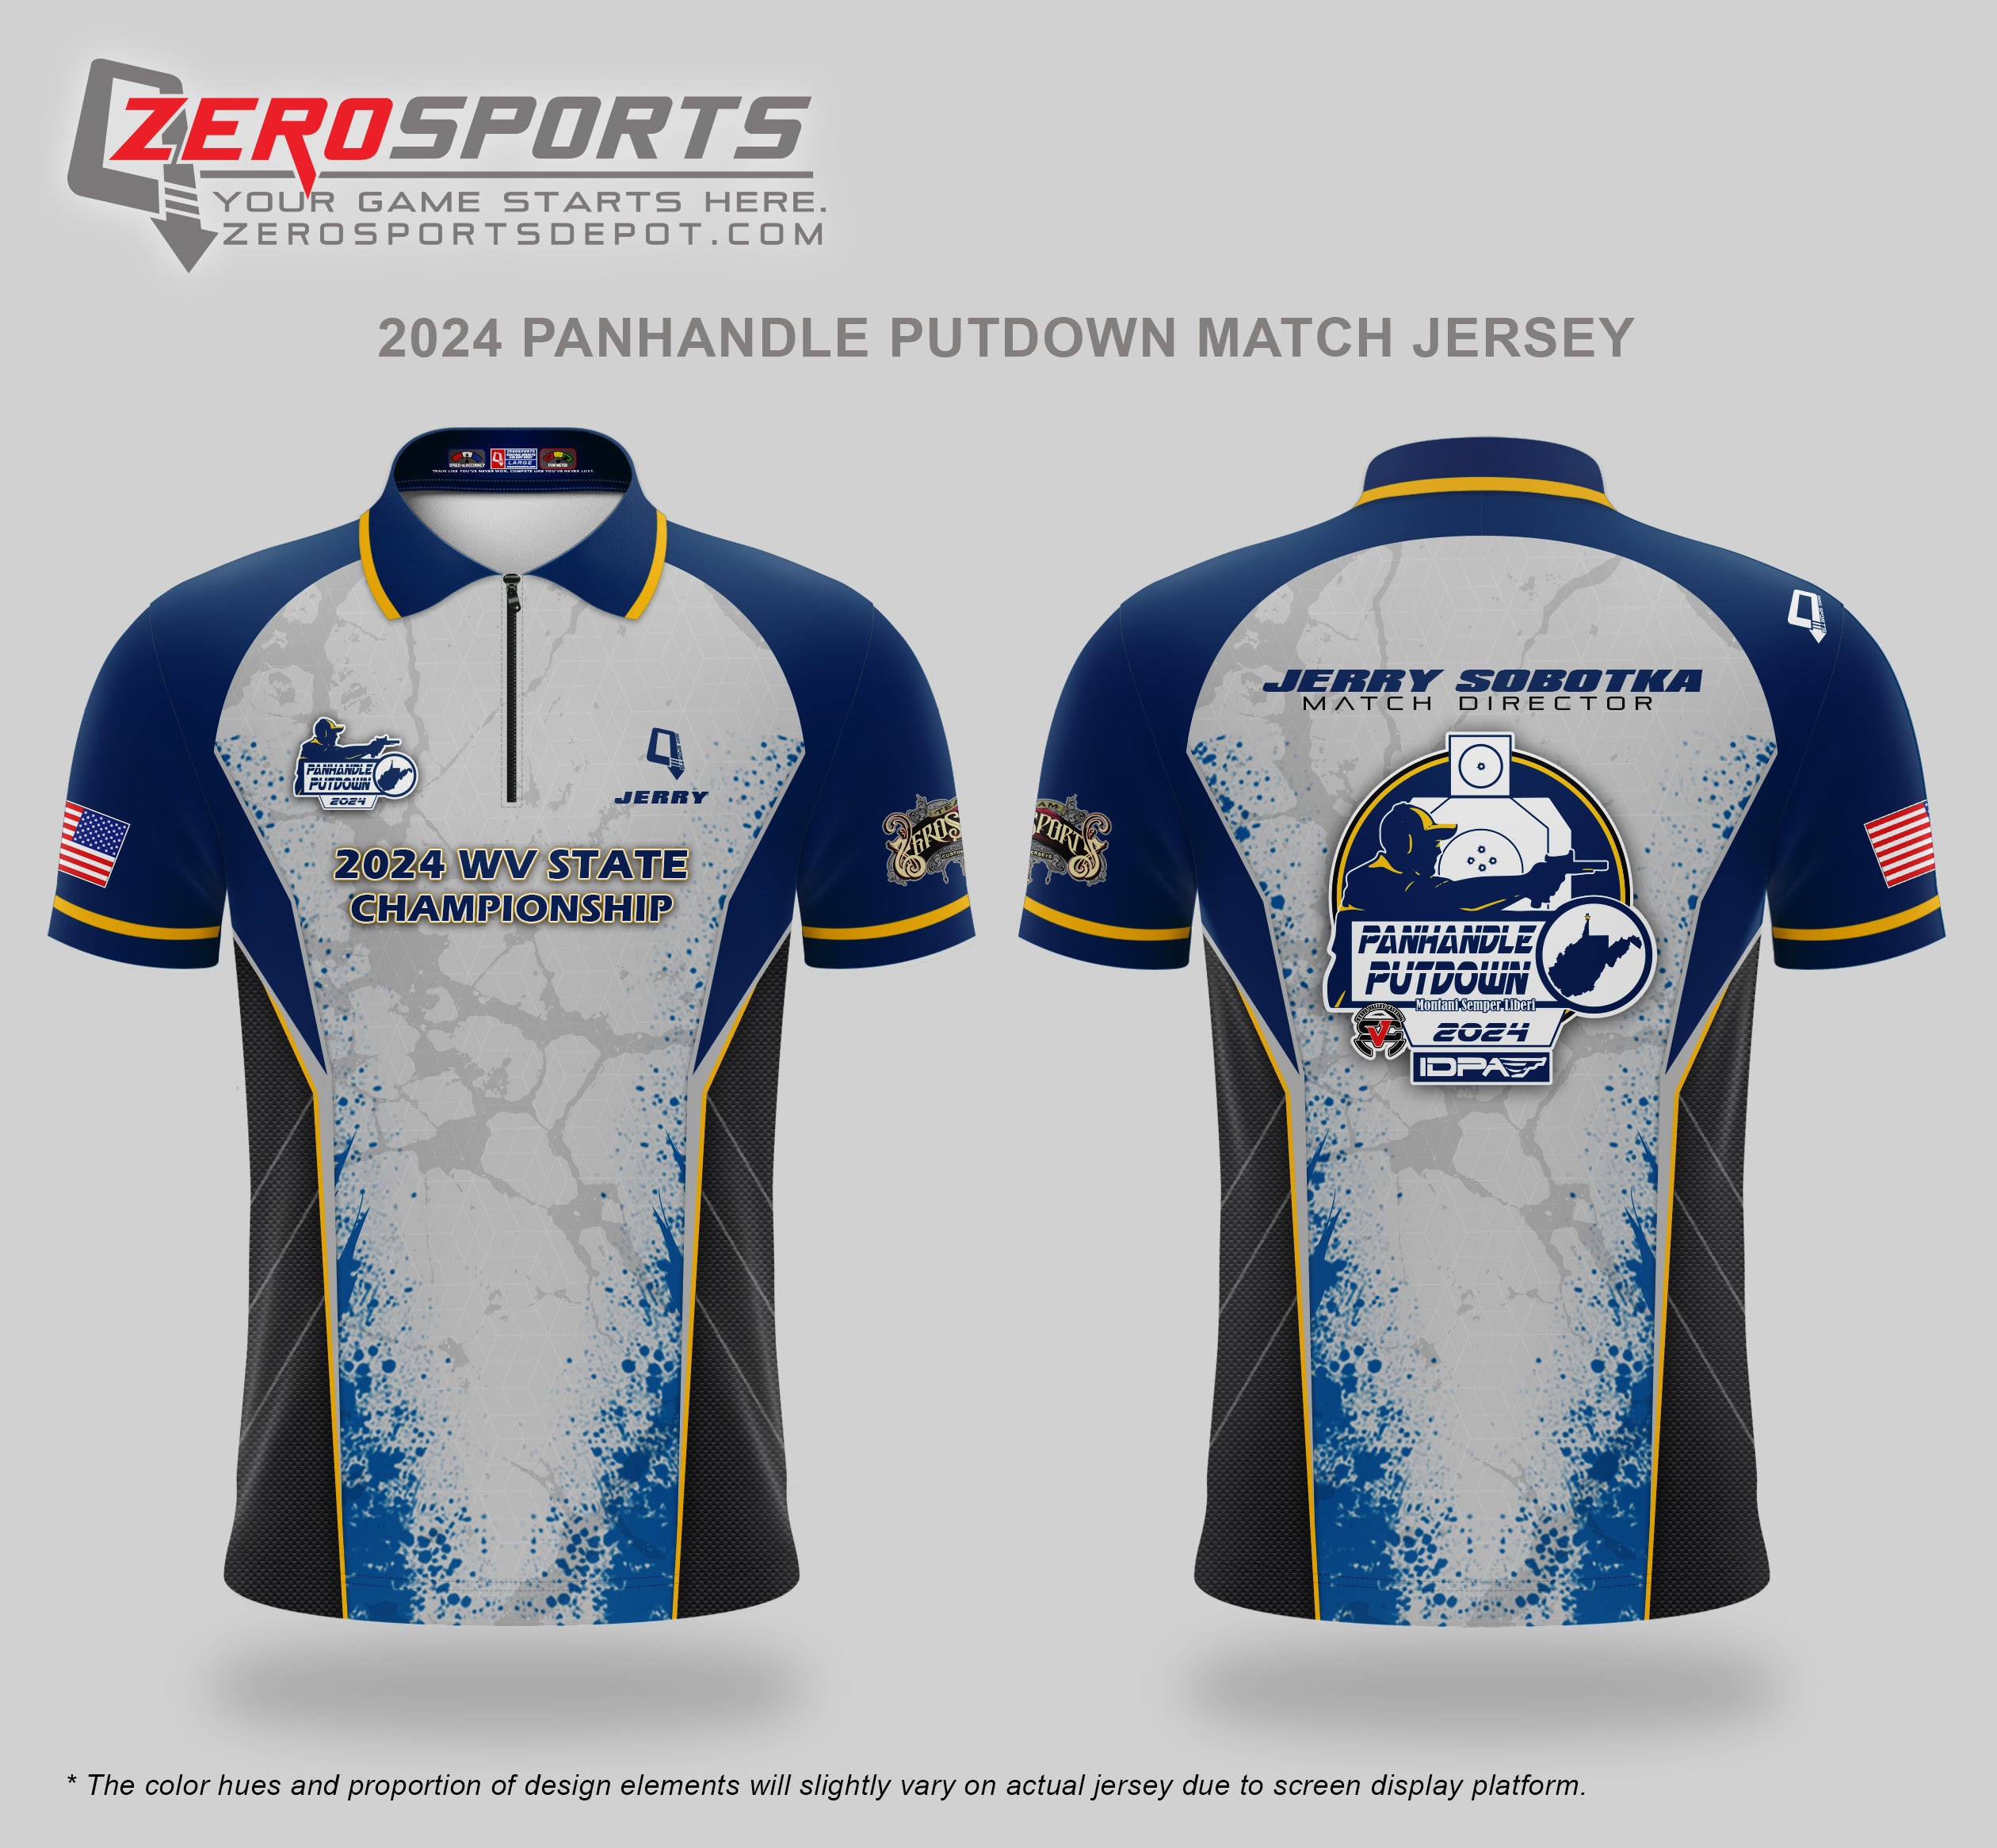 2024 Panhandle Putdown - The WV State Championship Match Jersey  **All orders after 4/10/2024 will be shipped directly to your address after the match.